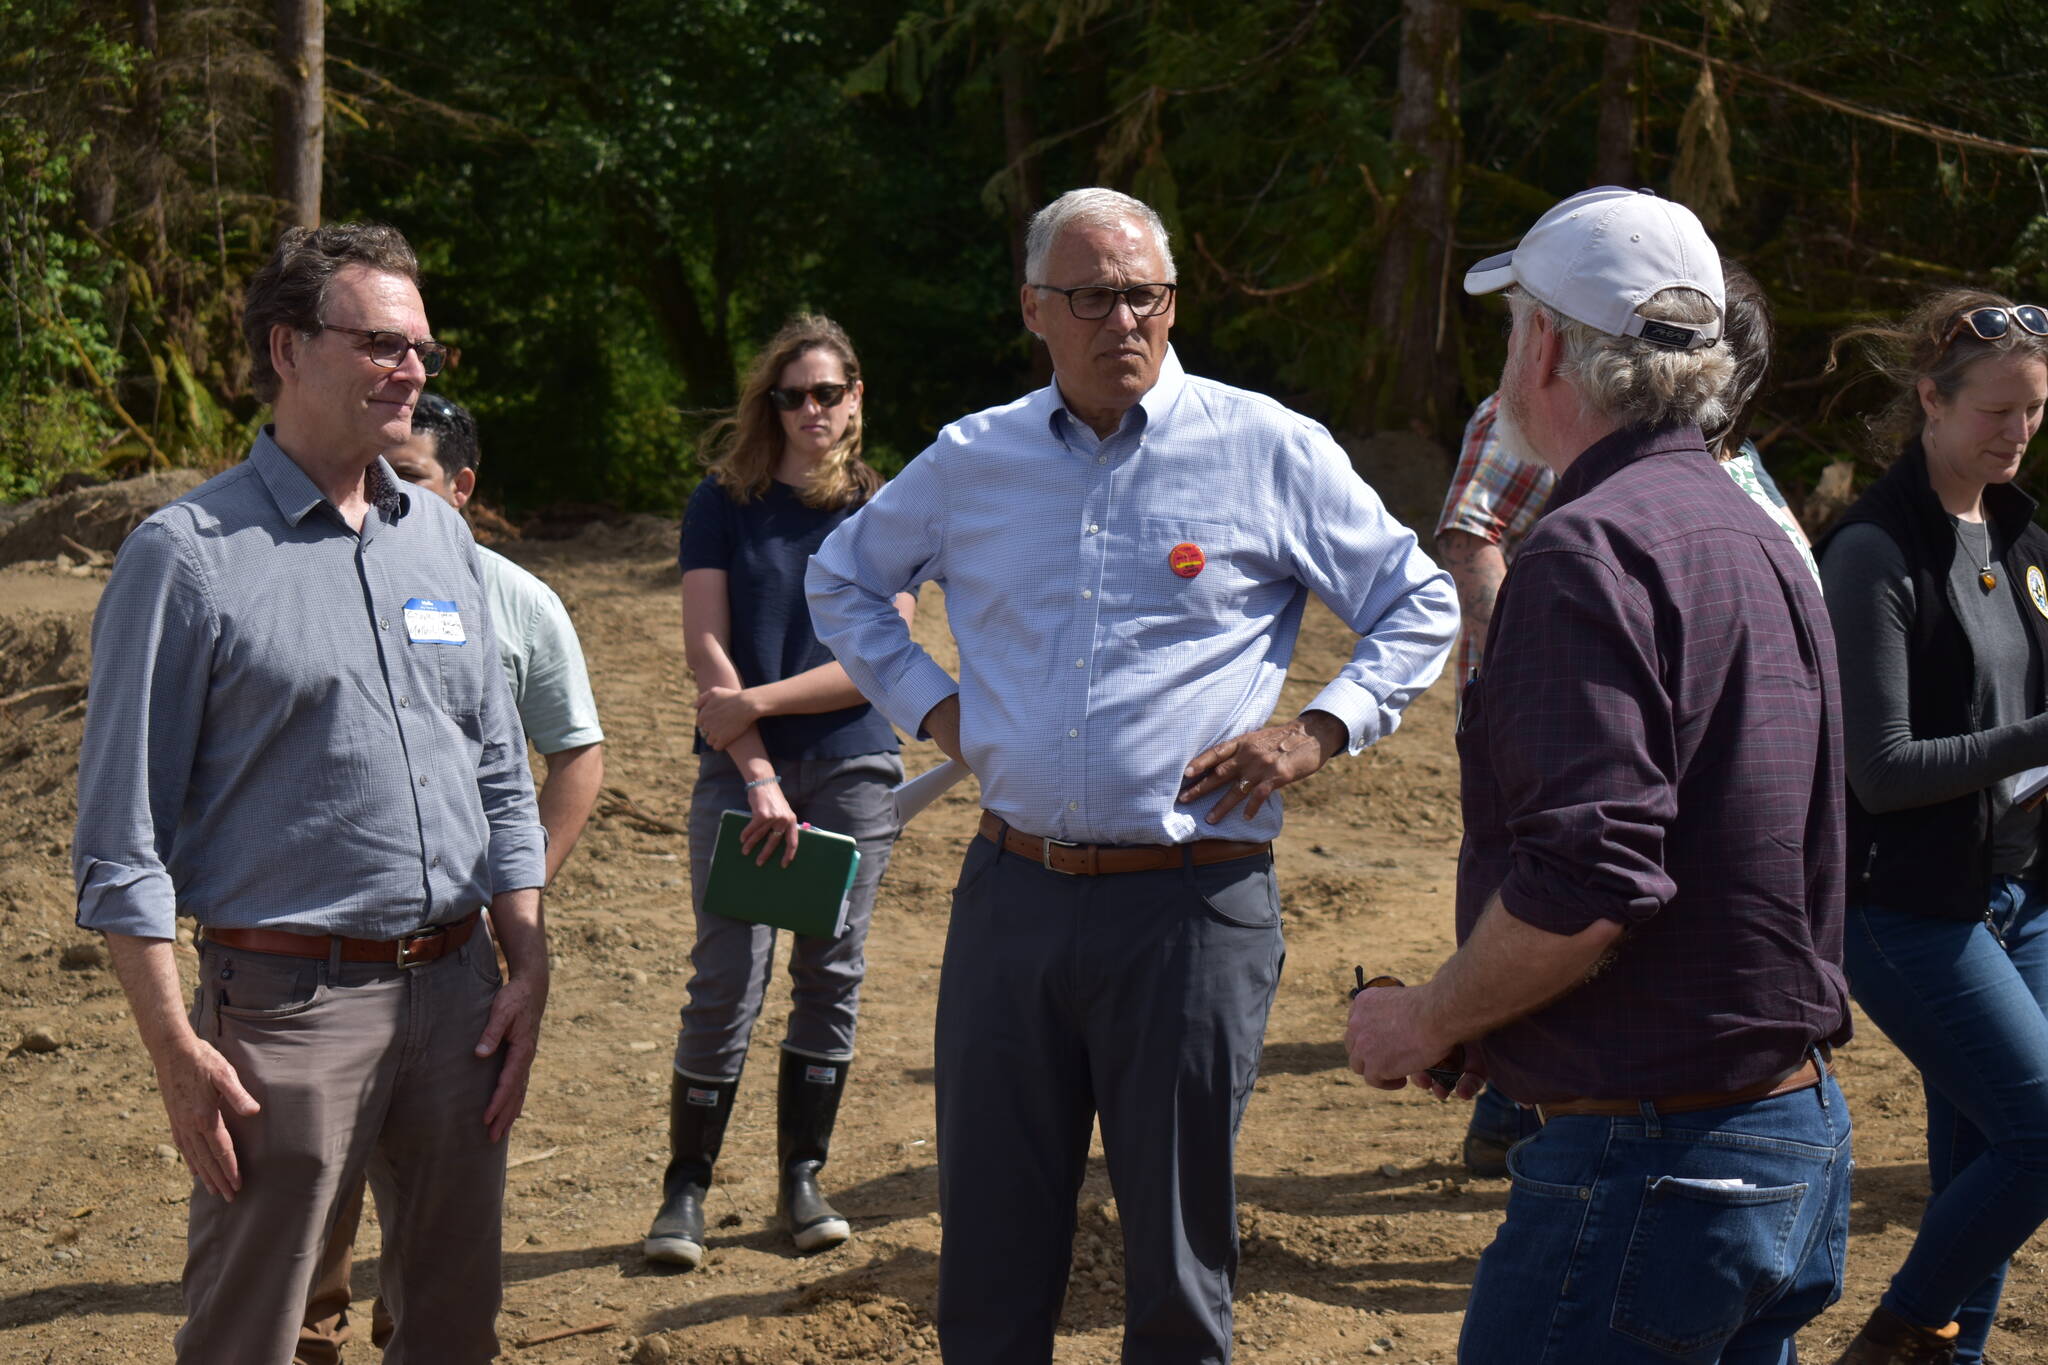 (Allen Leister | The Daily World)
                                Gov. Inslee (center) stands around board members from the Office of Chehalis Basis as they describe the work being done for the Wynoochee River restoration as part of the Early Action Reach projects. The Wynoochee River restoration project, which started in 2021, is slated for completion by the end of the summer.